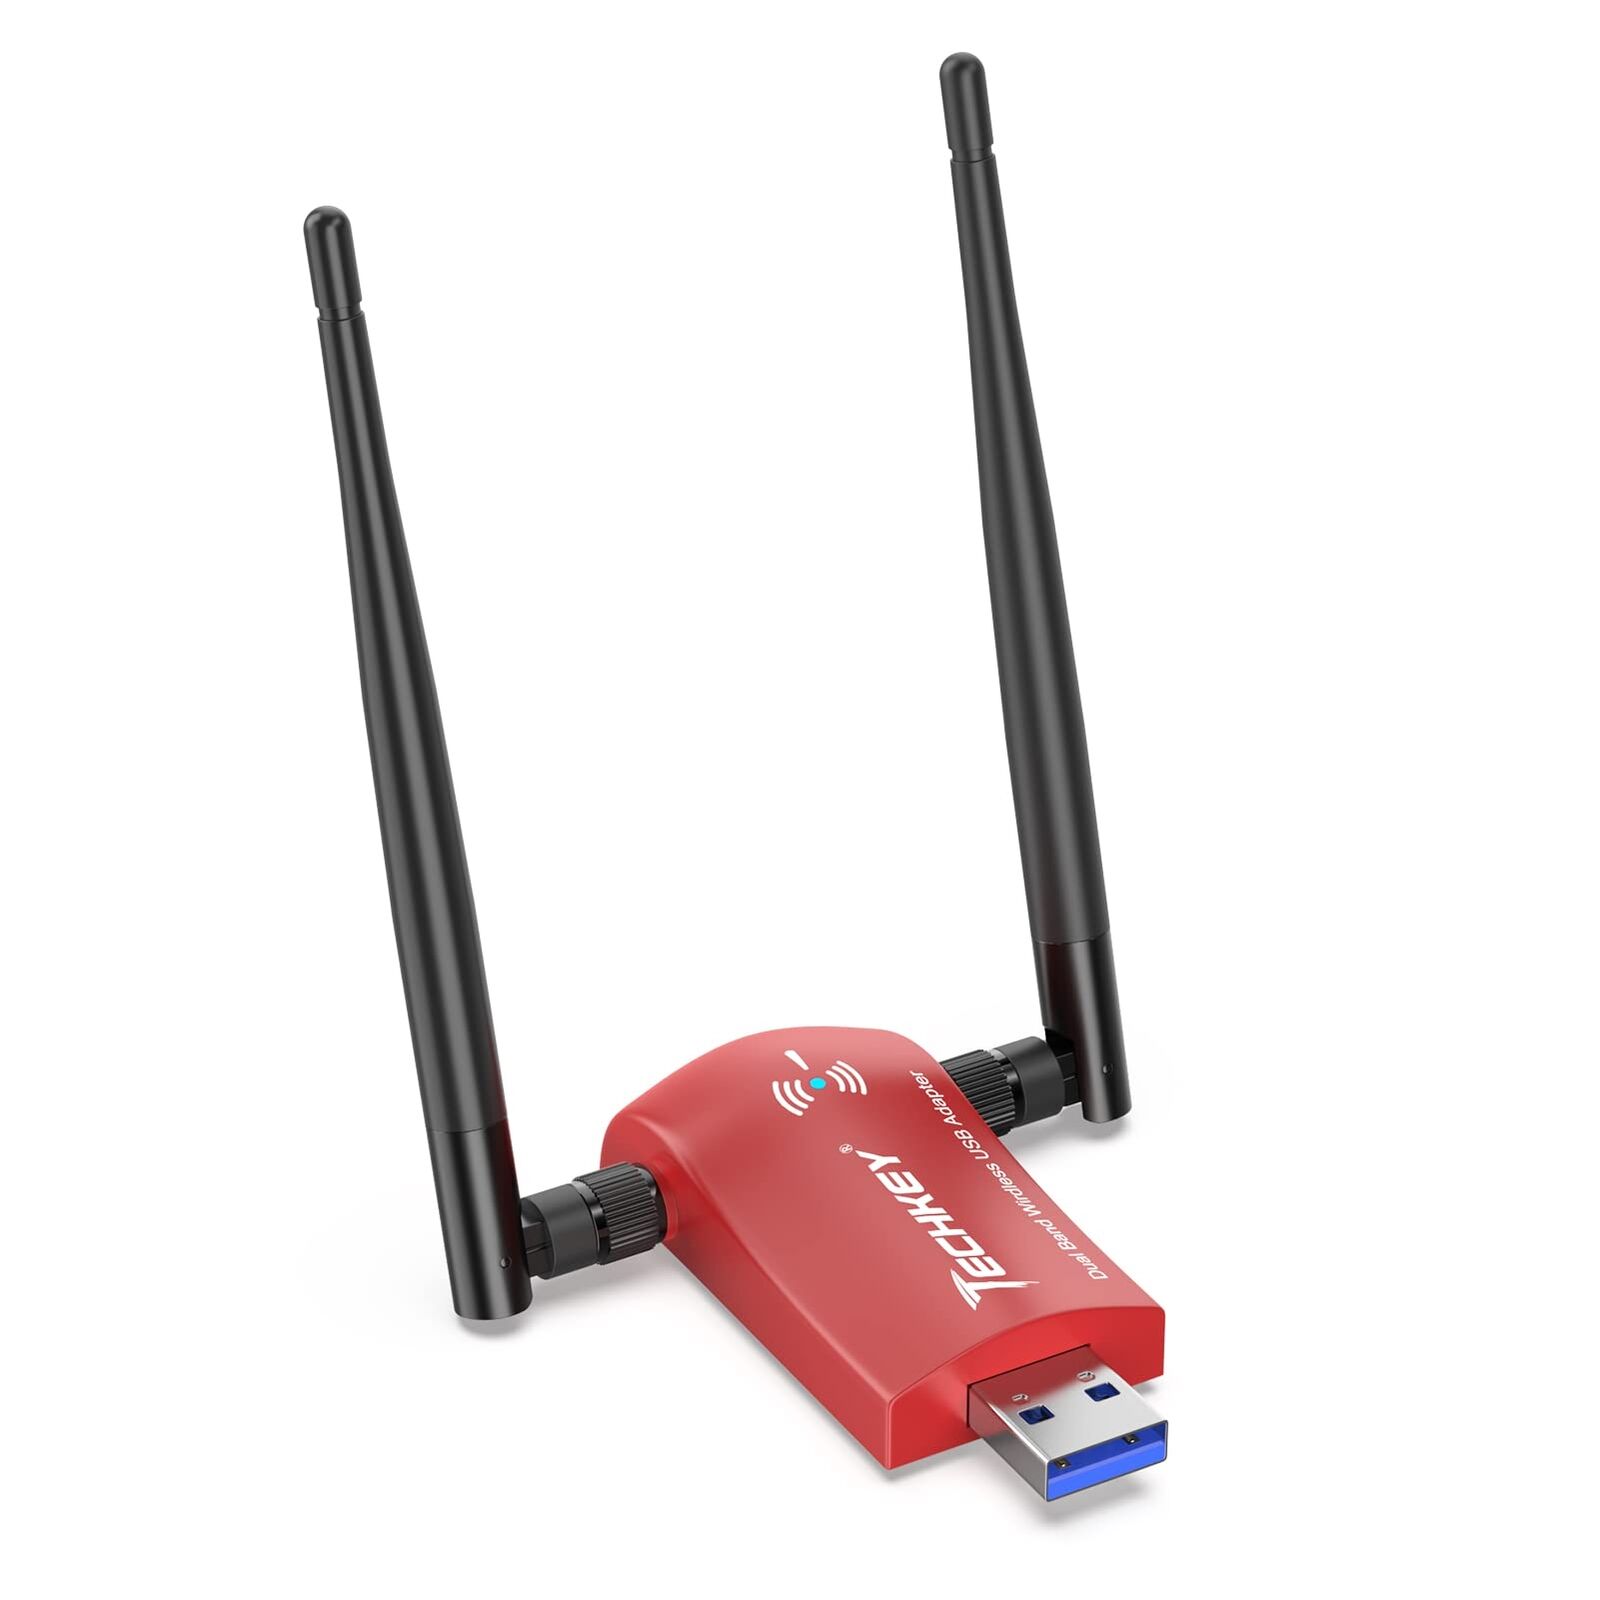 Network Devices for PC - 1200Mbps Dual Band 2.4GHz/300Mbps 5GHz/867Mbps High ...